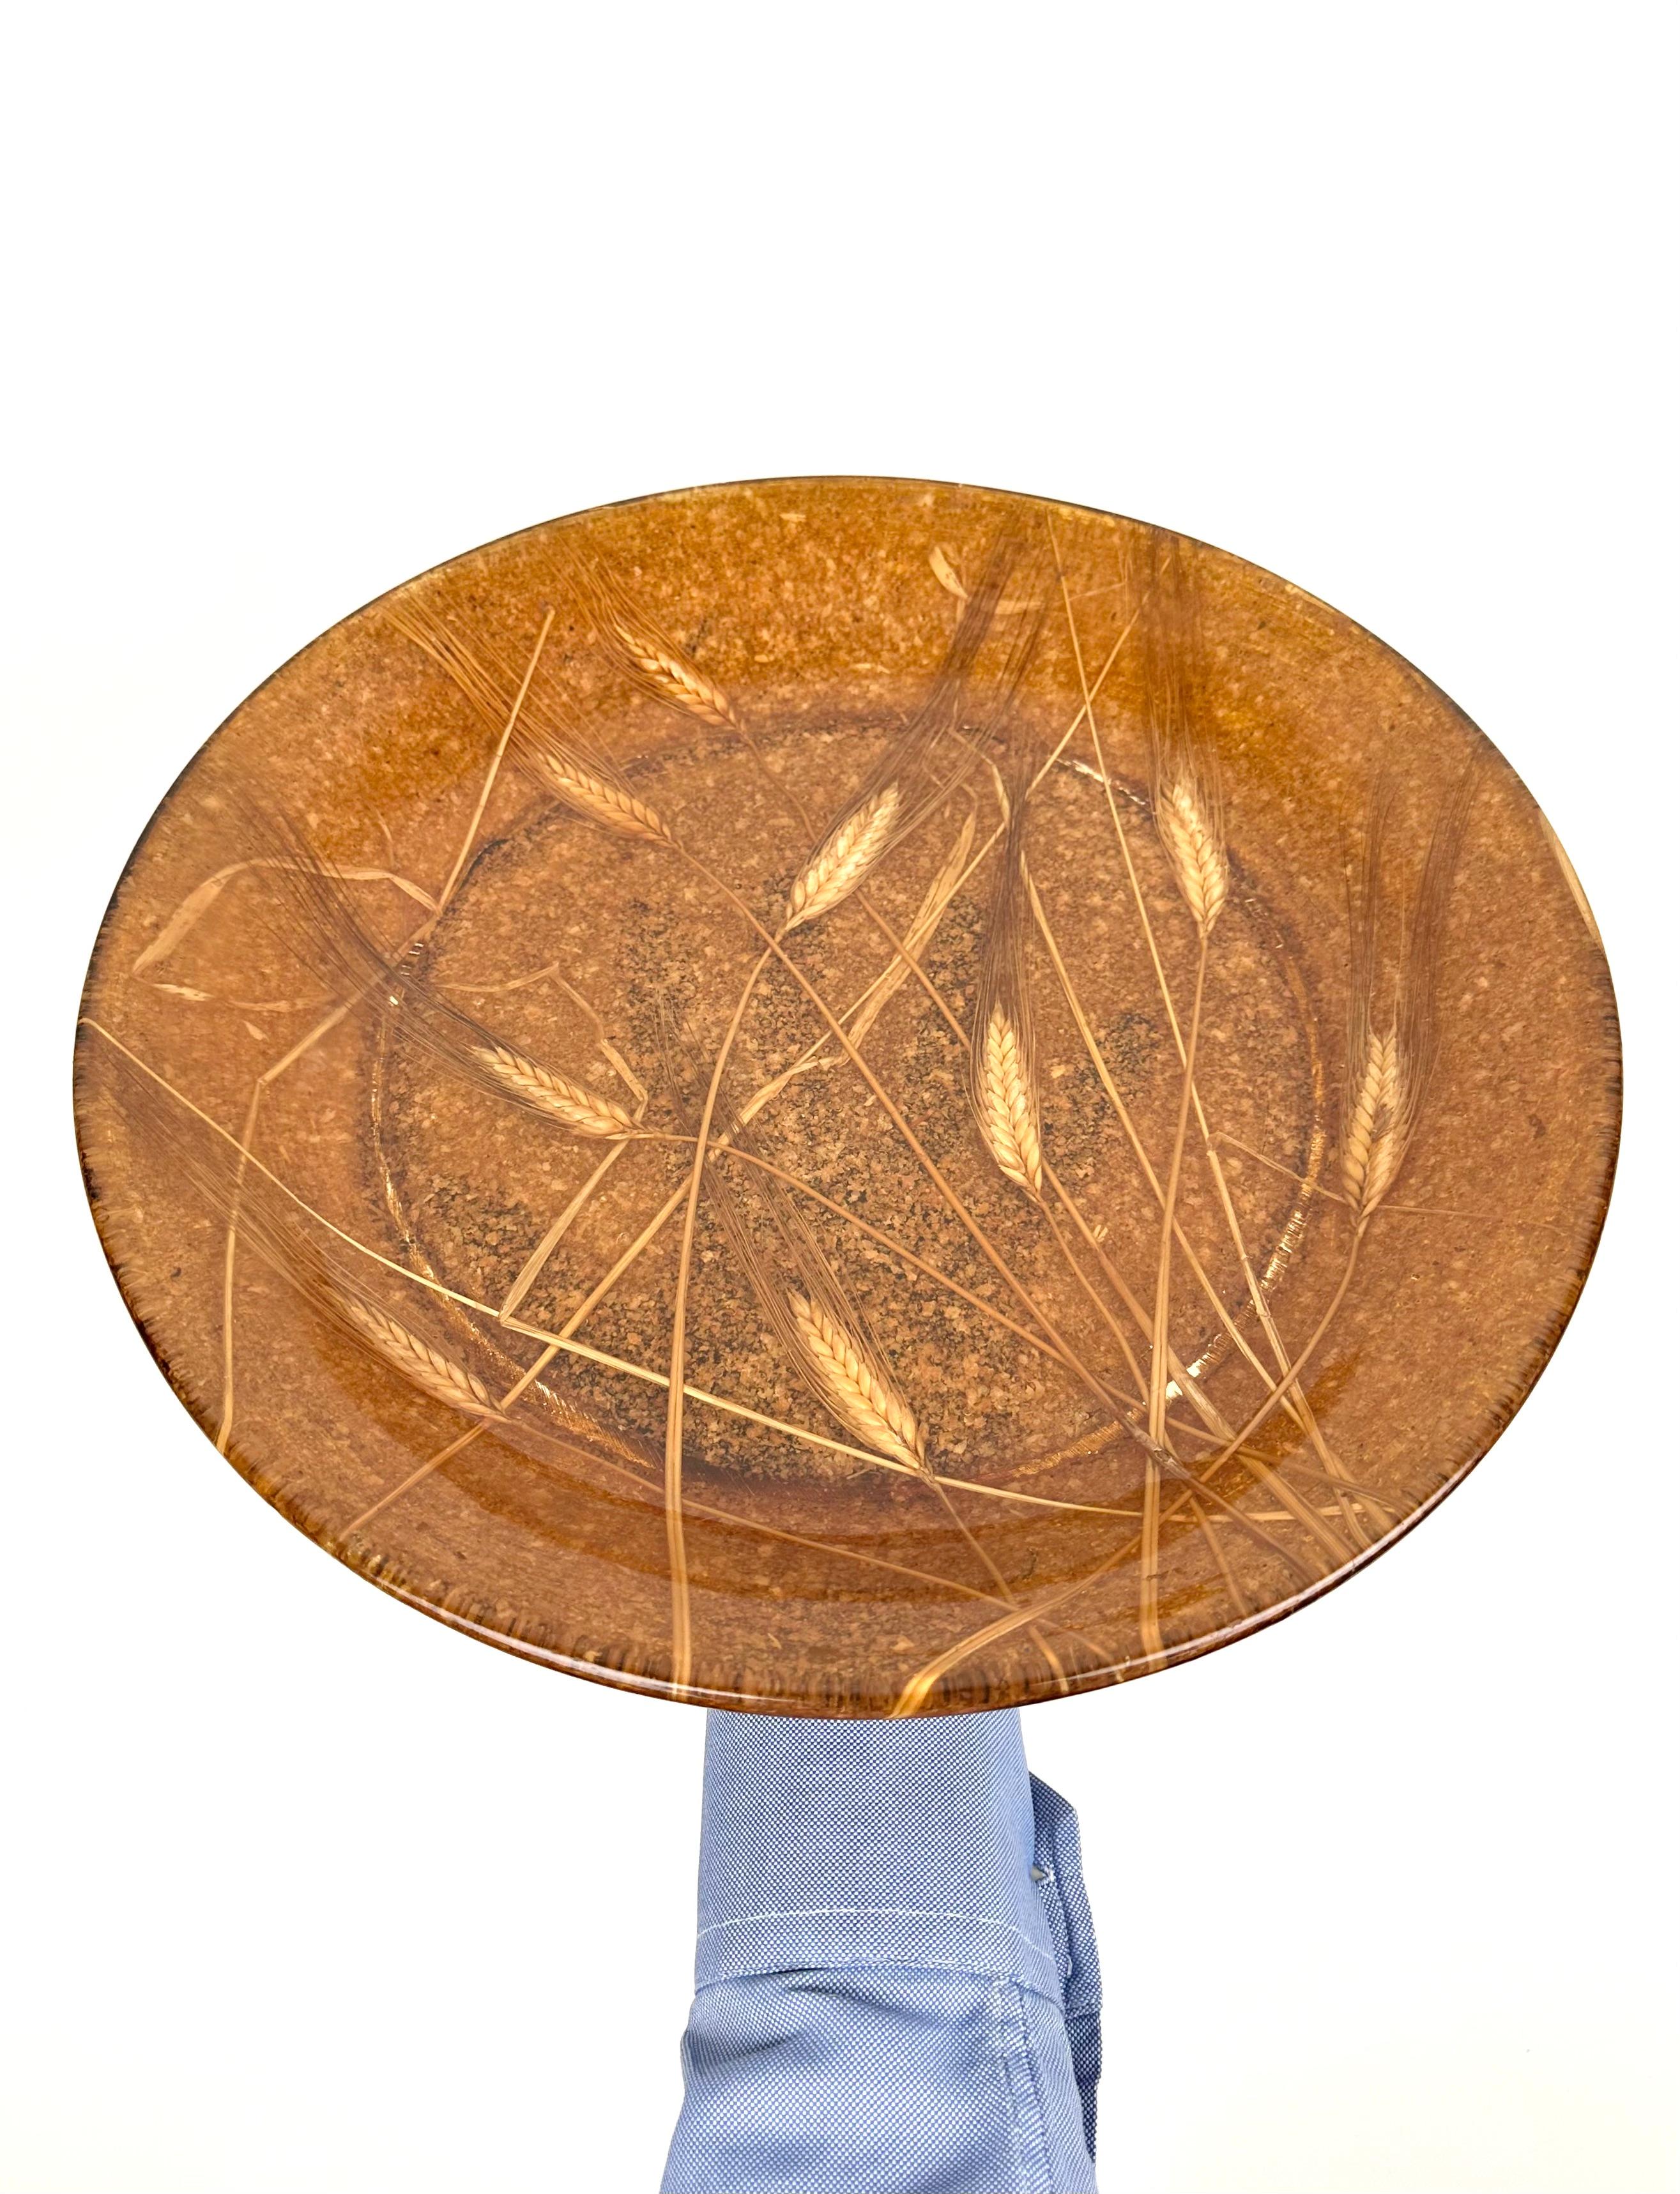 Round Centerpiece Plate in Acrylic with Ears of Wheat Inclusions, Italy 1970s For Sale 1